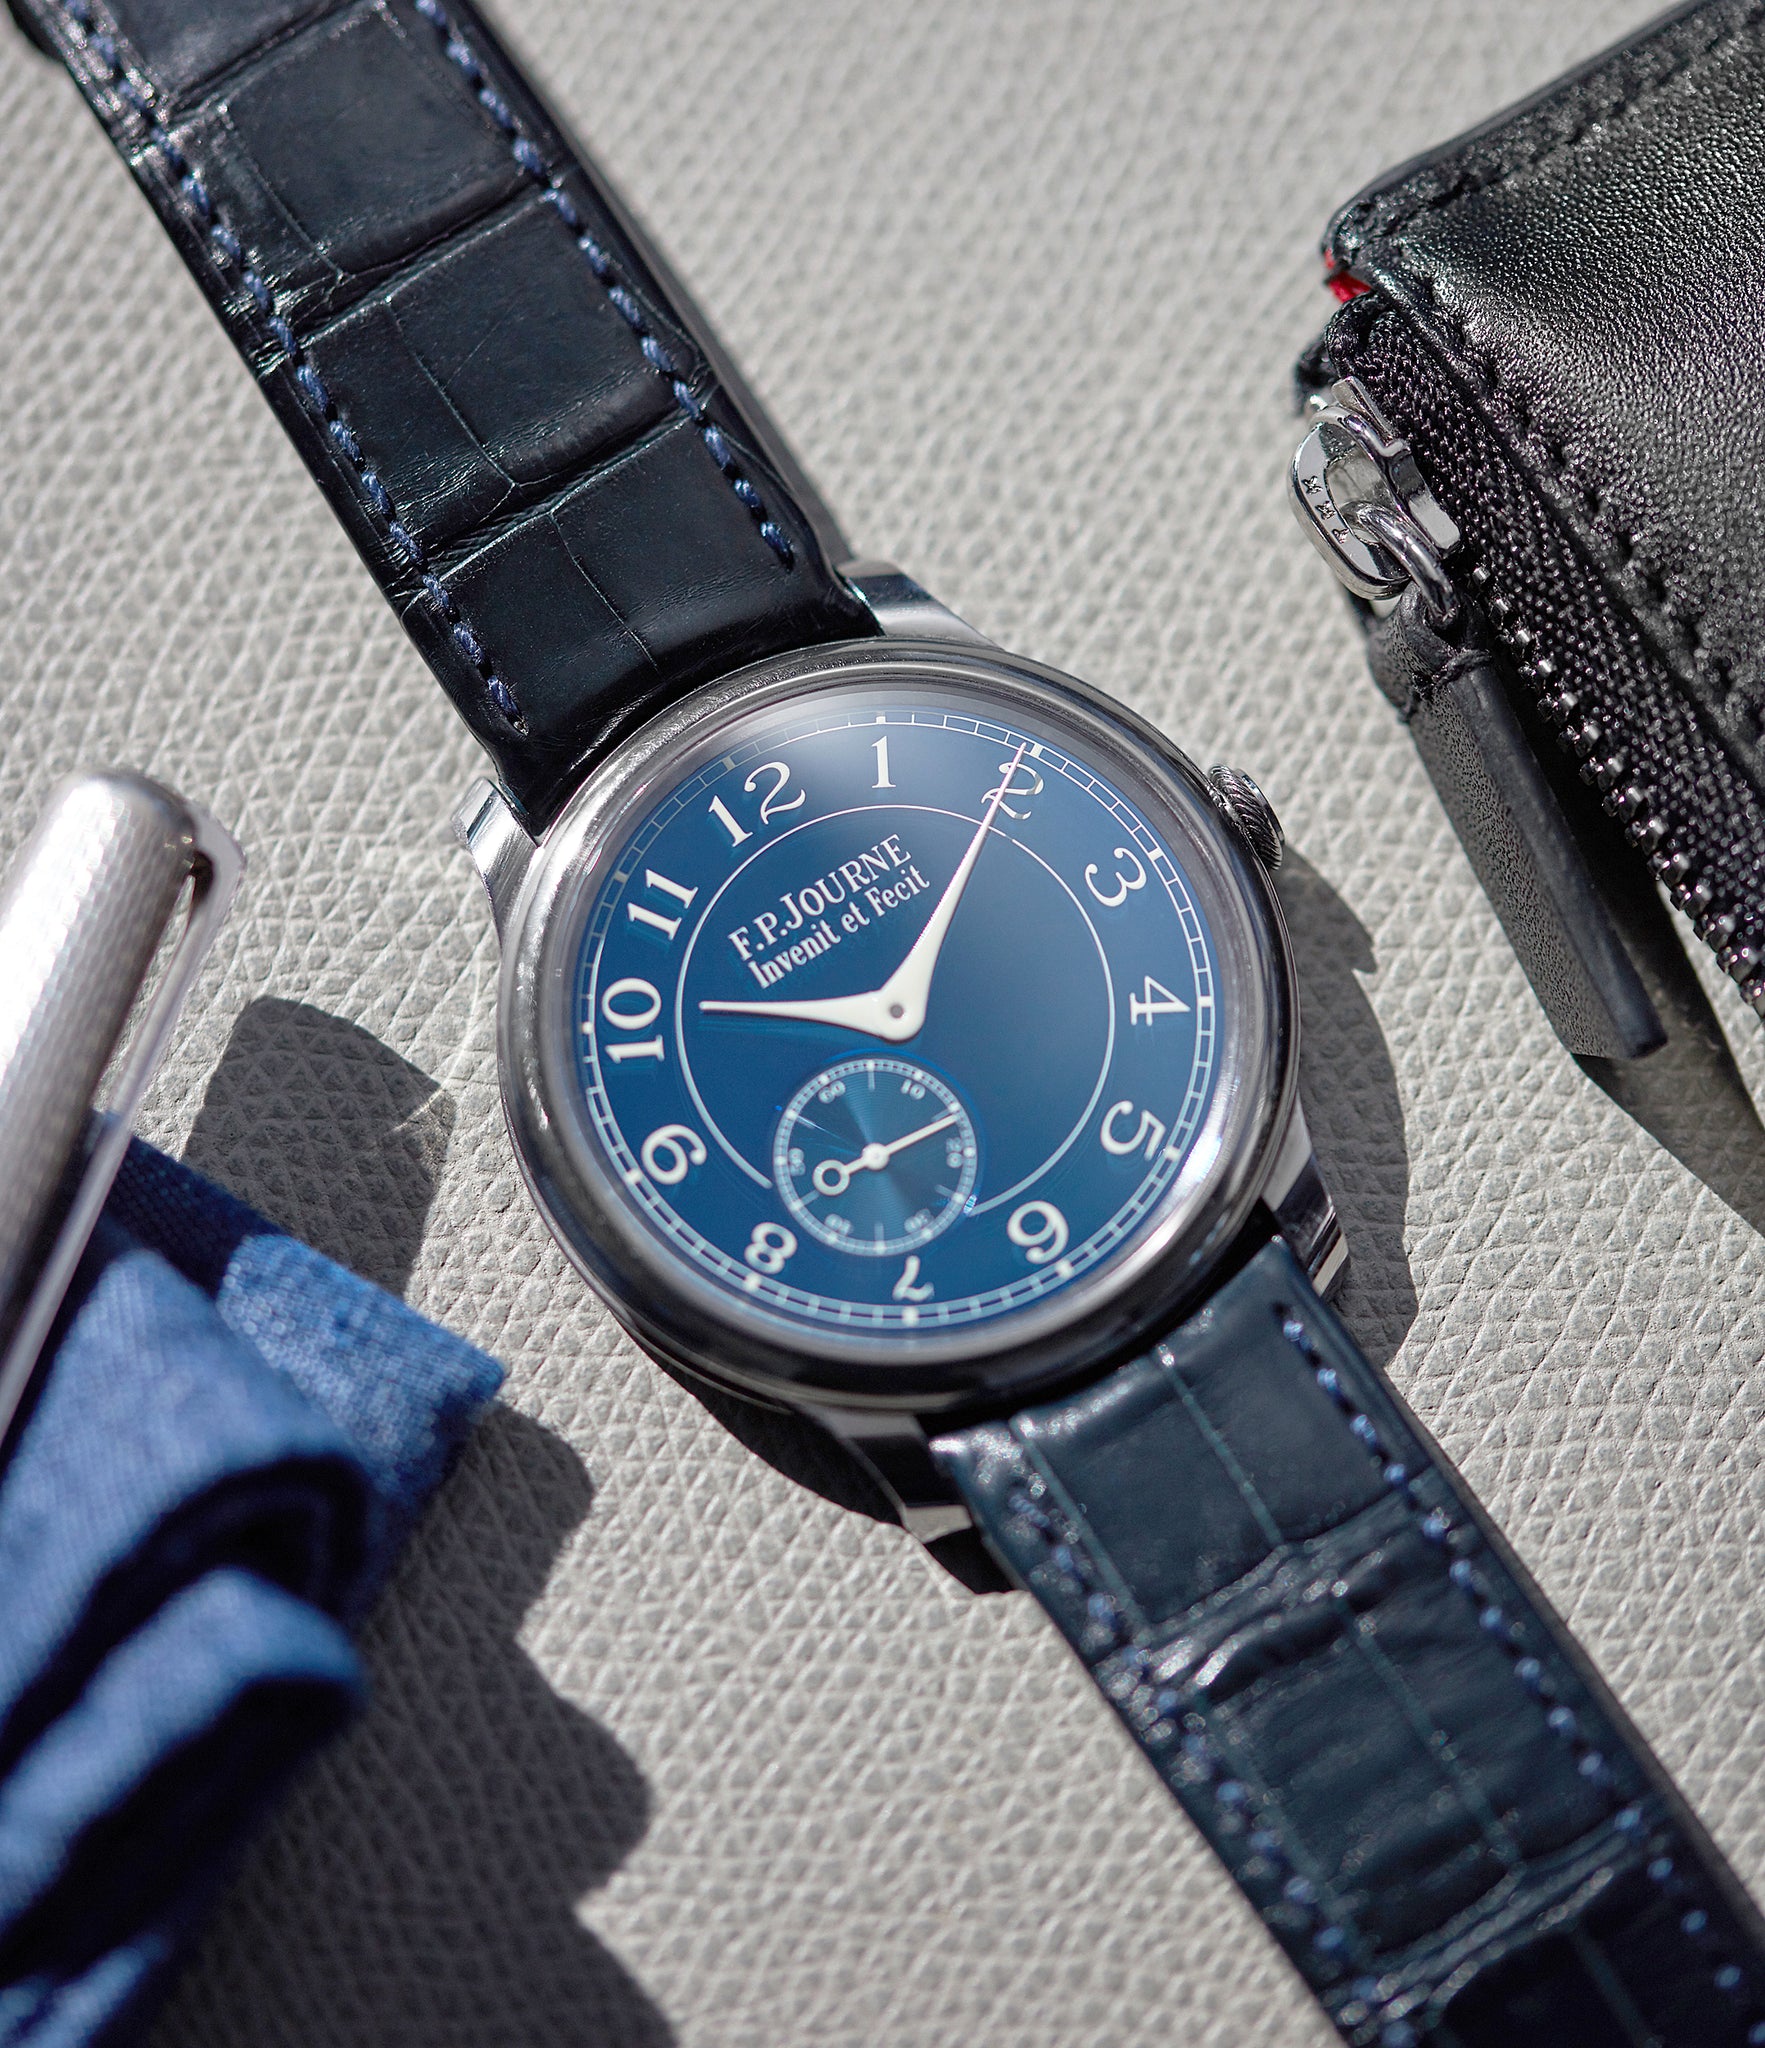 F. P. Journe Chronometre Bleu tantalum blue dial watch independent watchmaker for sale online at A Collected Man London UK specialist of rare watches 